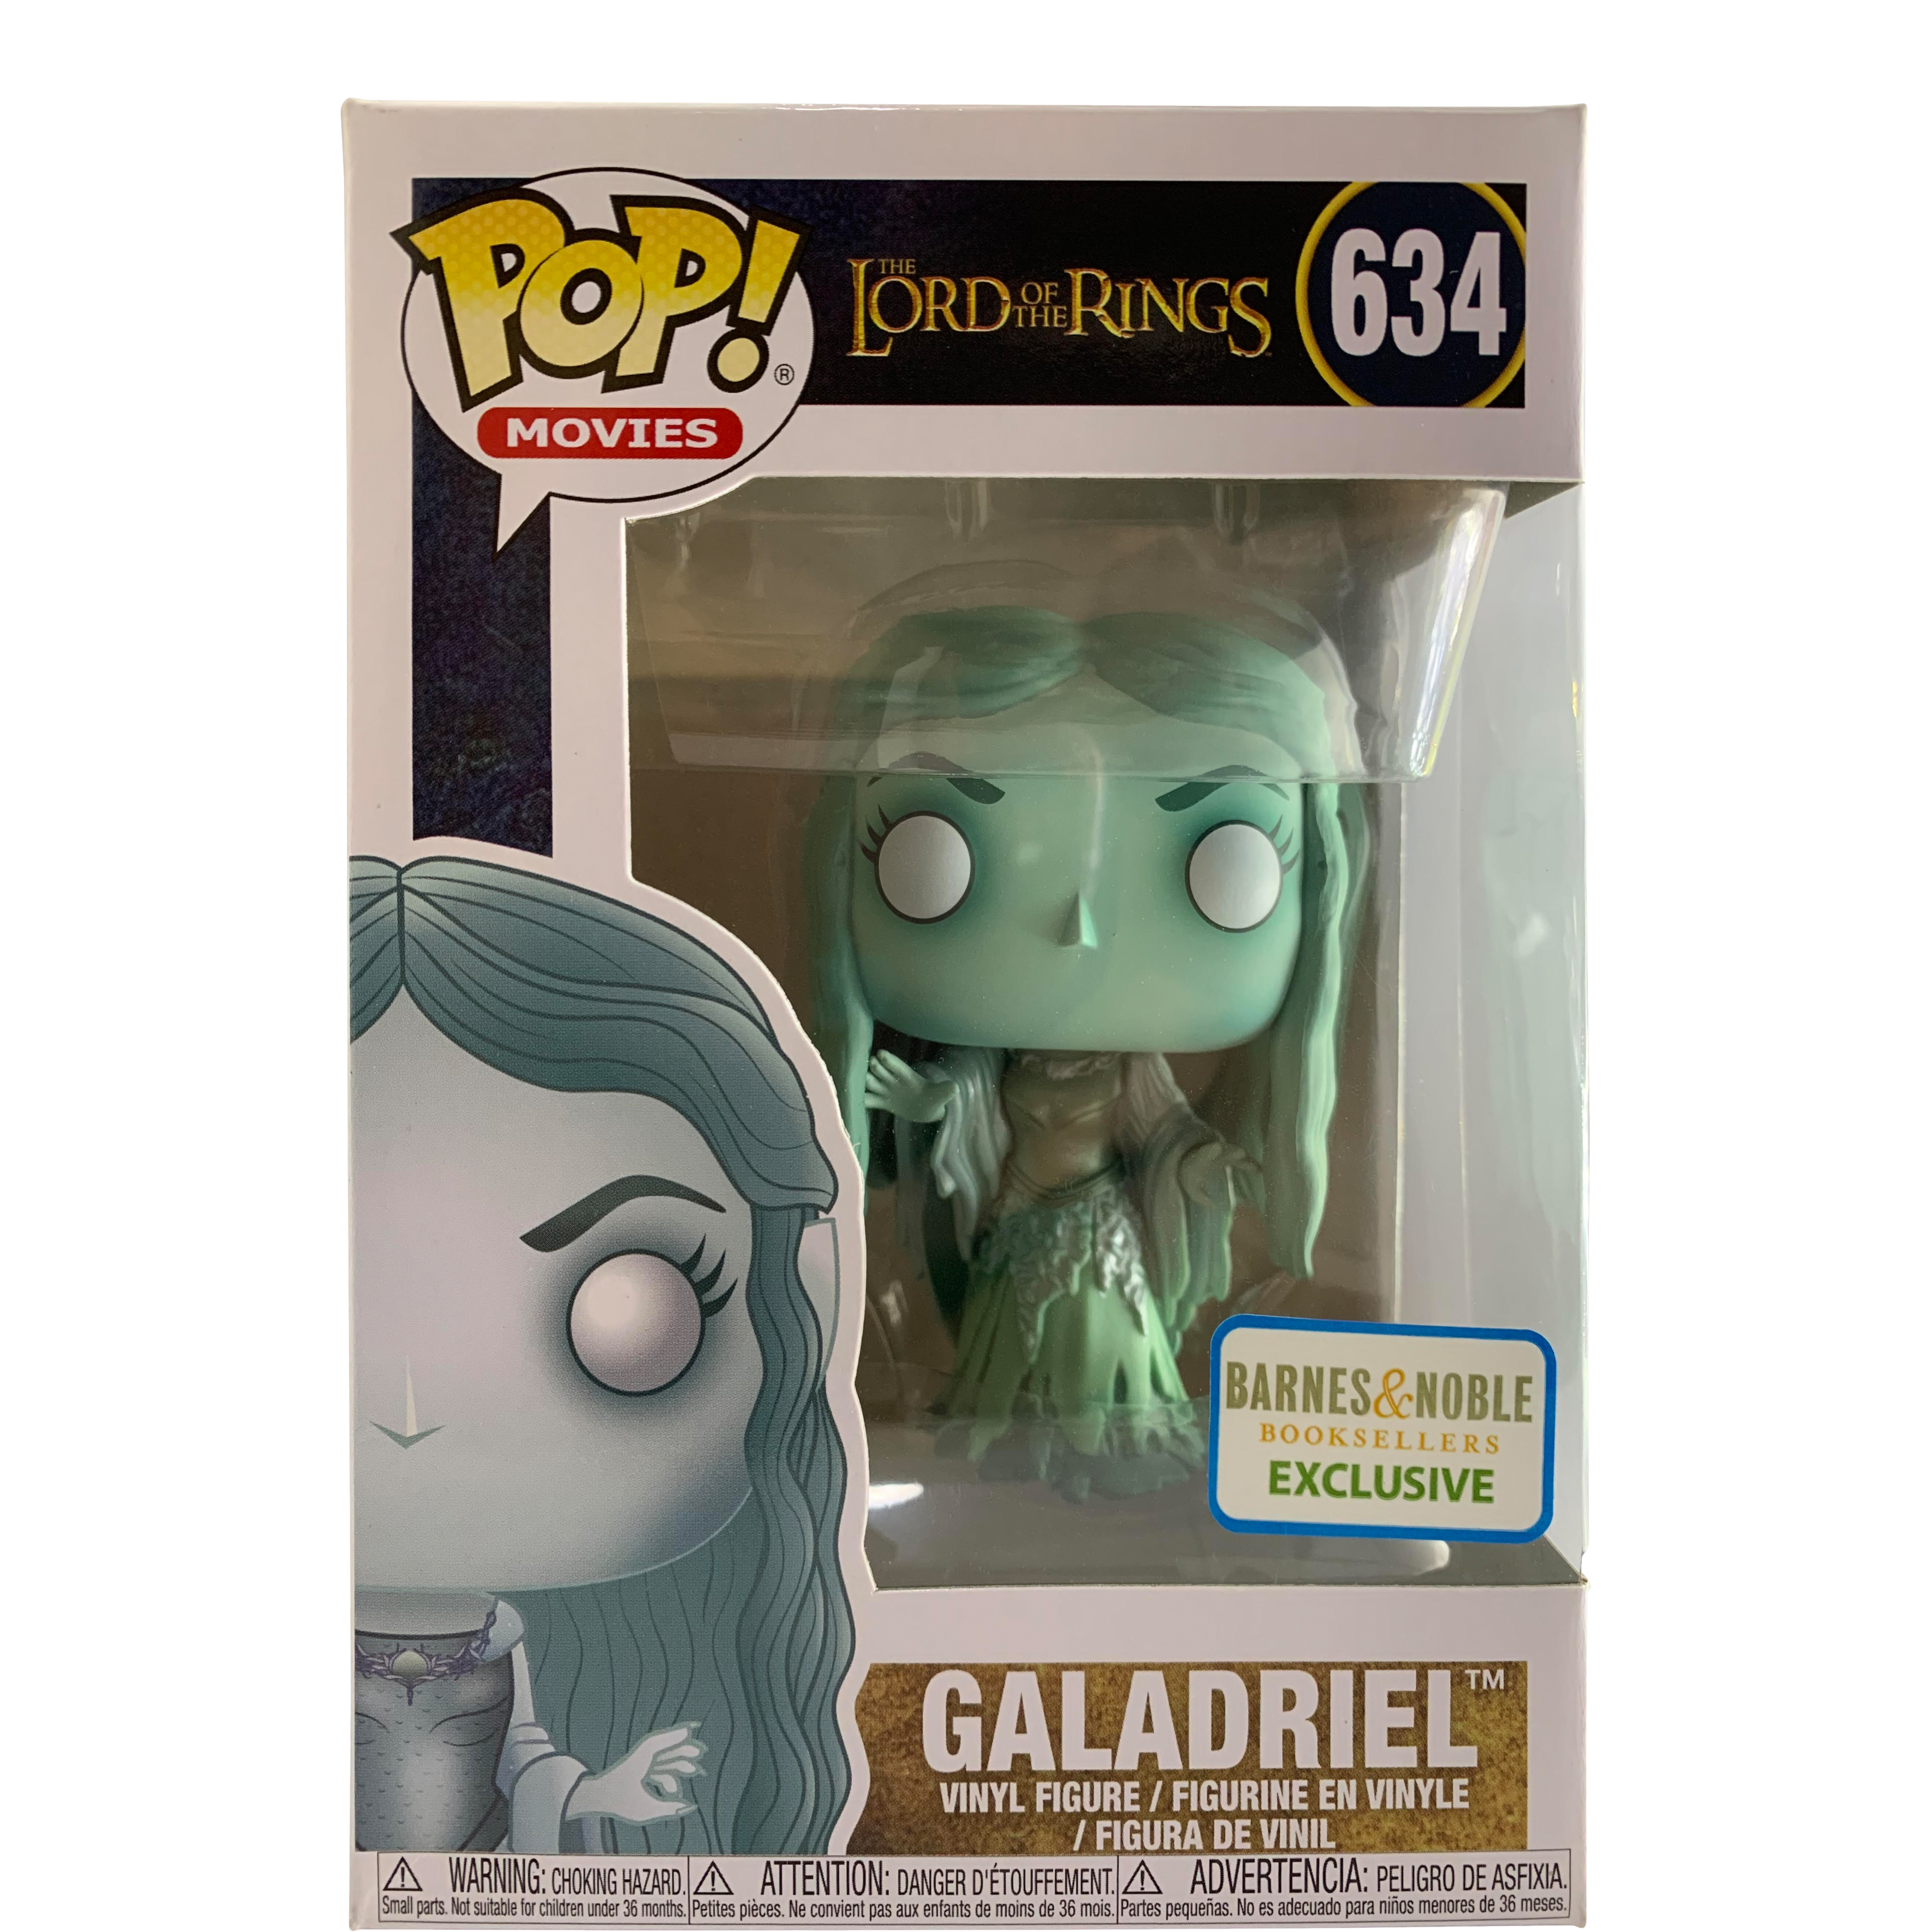 Funko Pop! Movies Lord of the Rings Galadriel Barnes and Noble